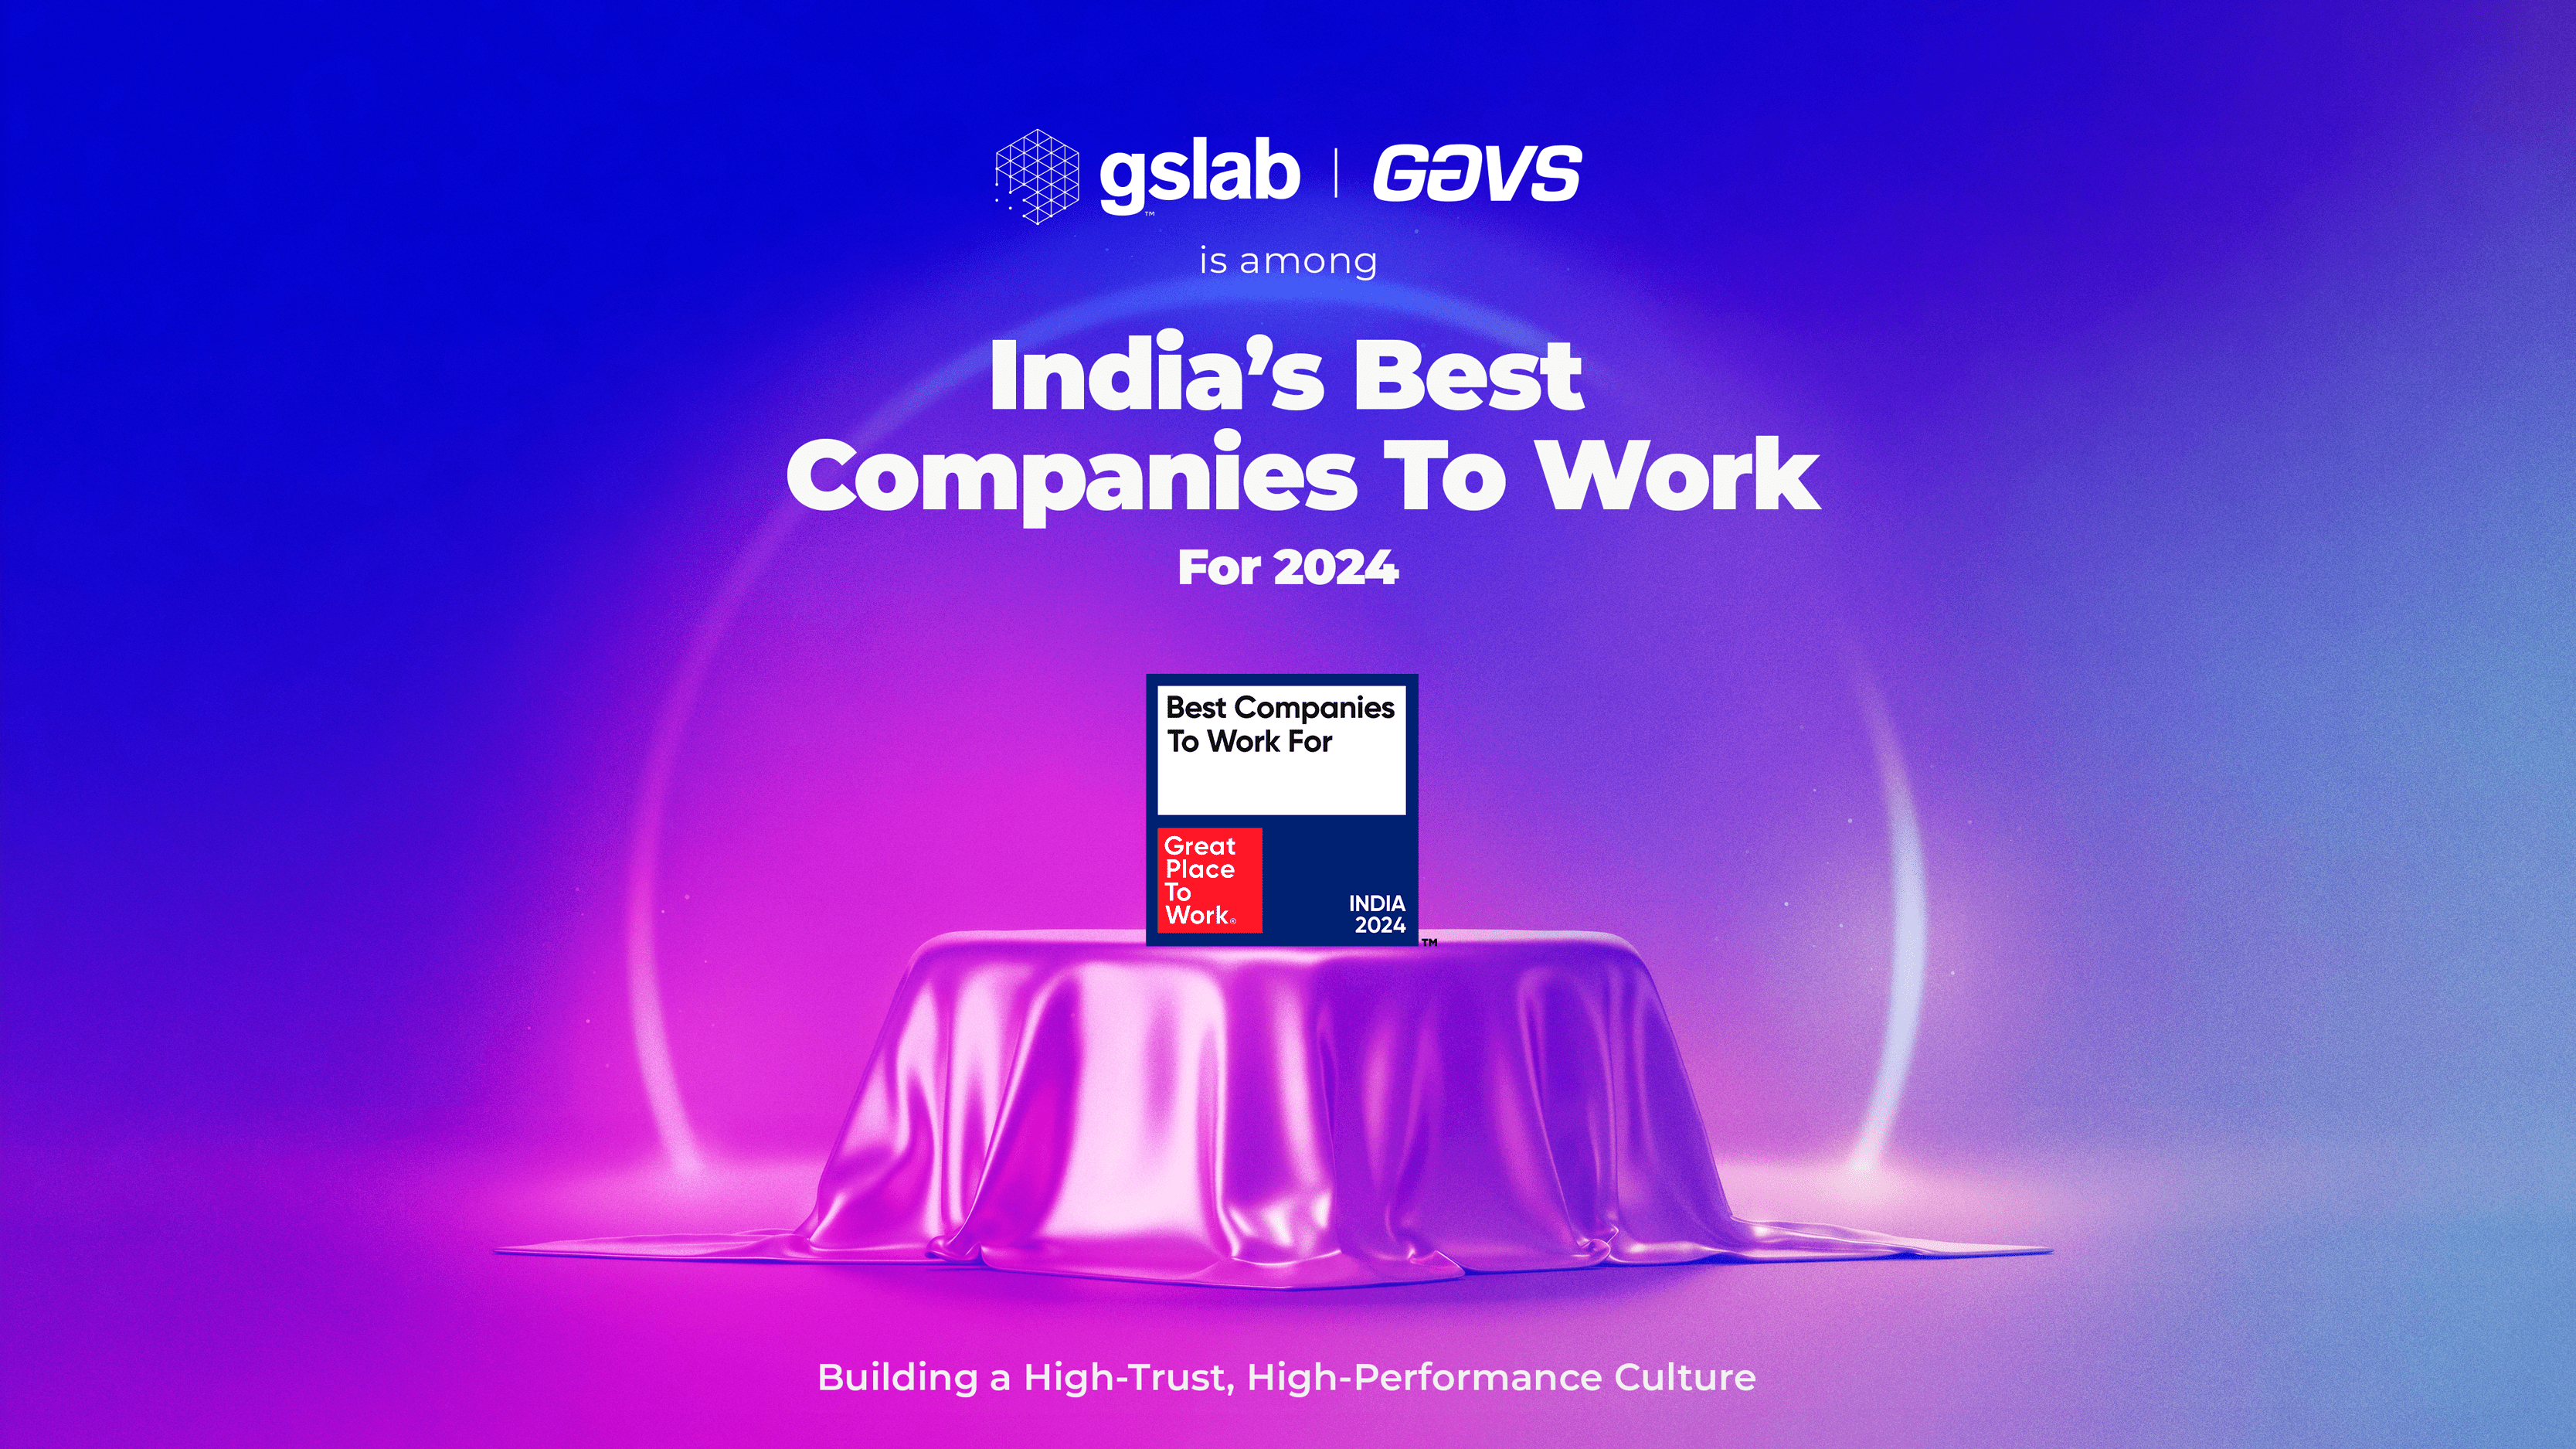 GS Lab | GAVS is among the Top 100 India’s Best Companies To Work For 2024